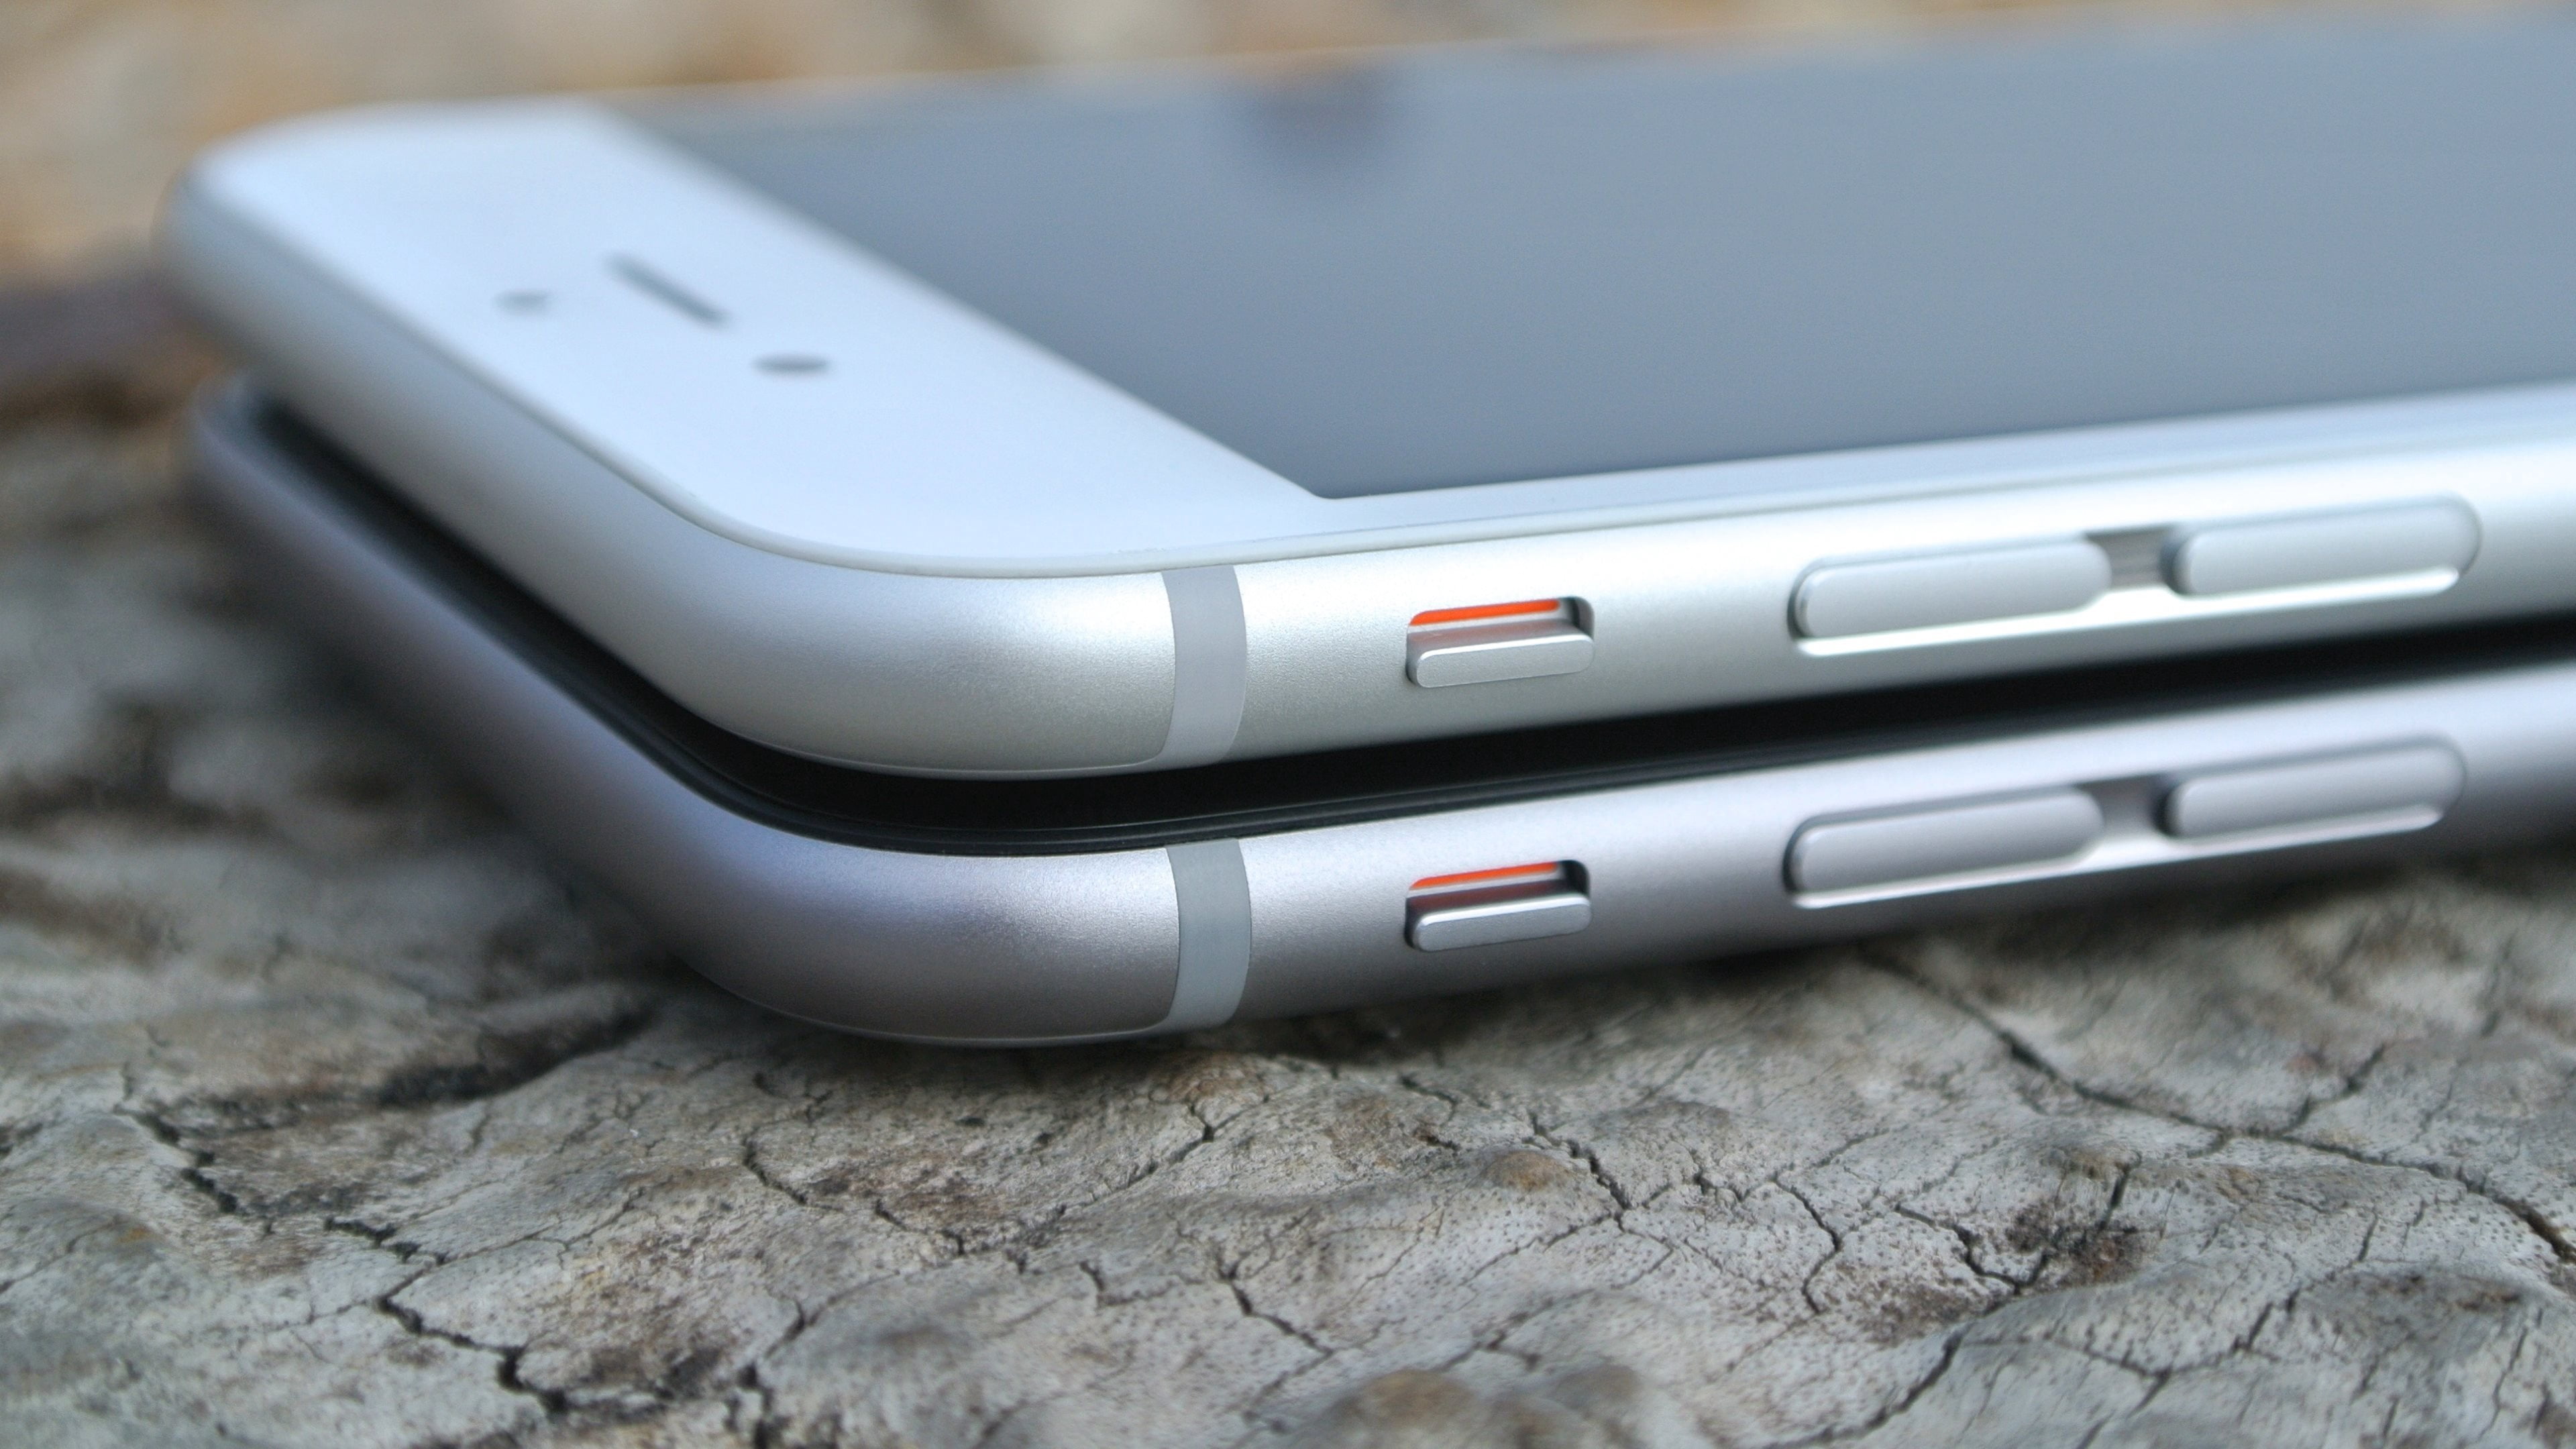 silver and space gray iPhone 6's, apple, hi-tech, 2014, technology